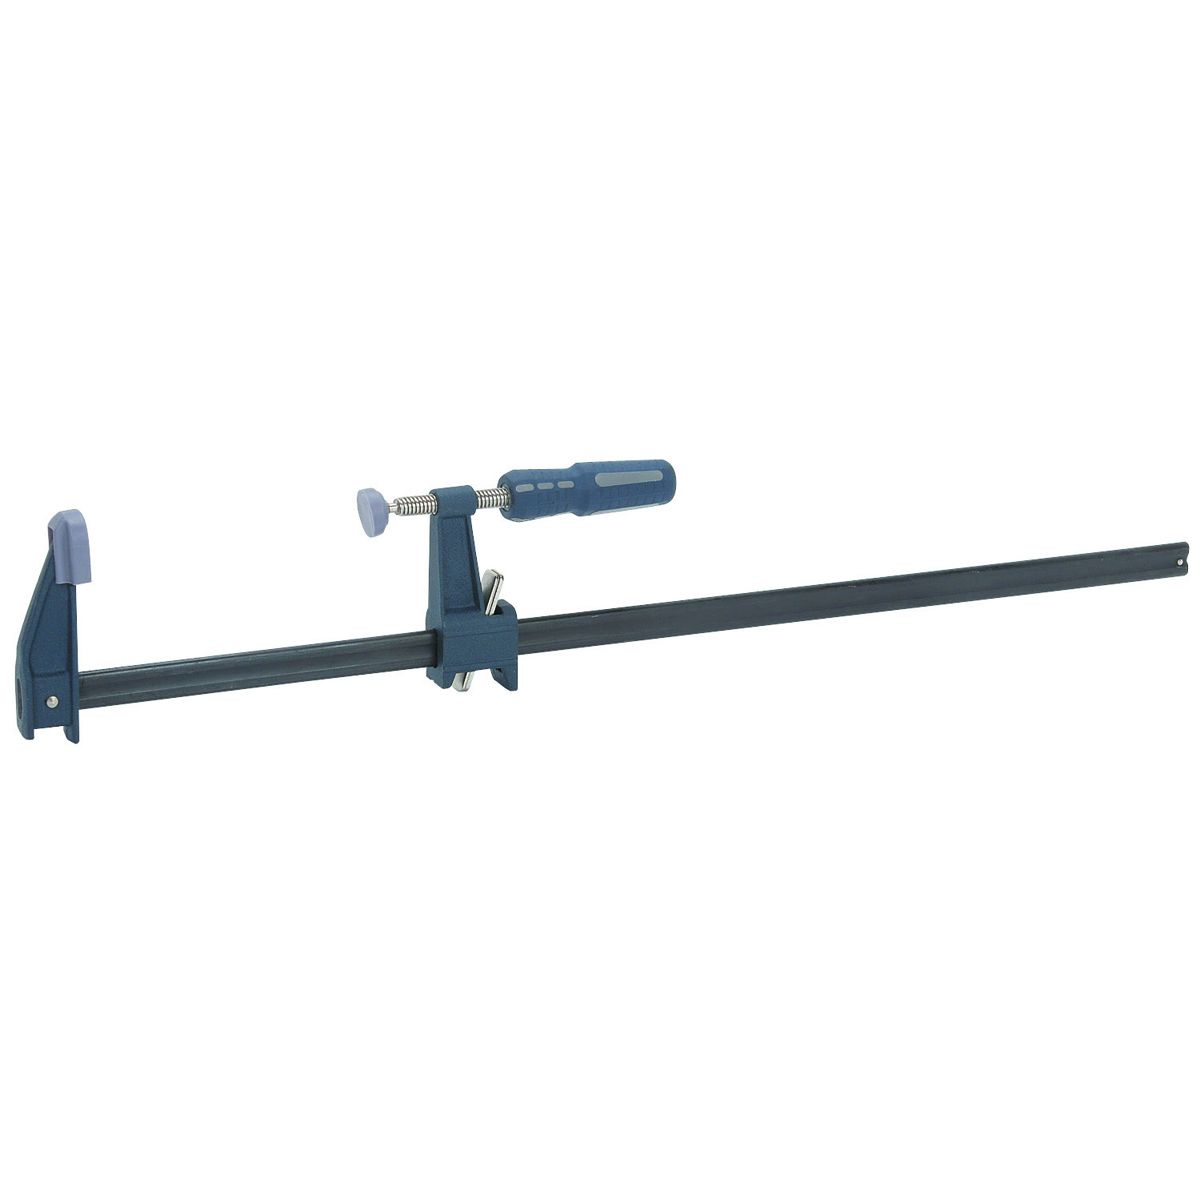 PITTSBURGH 24" Quick Release Bar Clamp